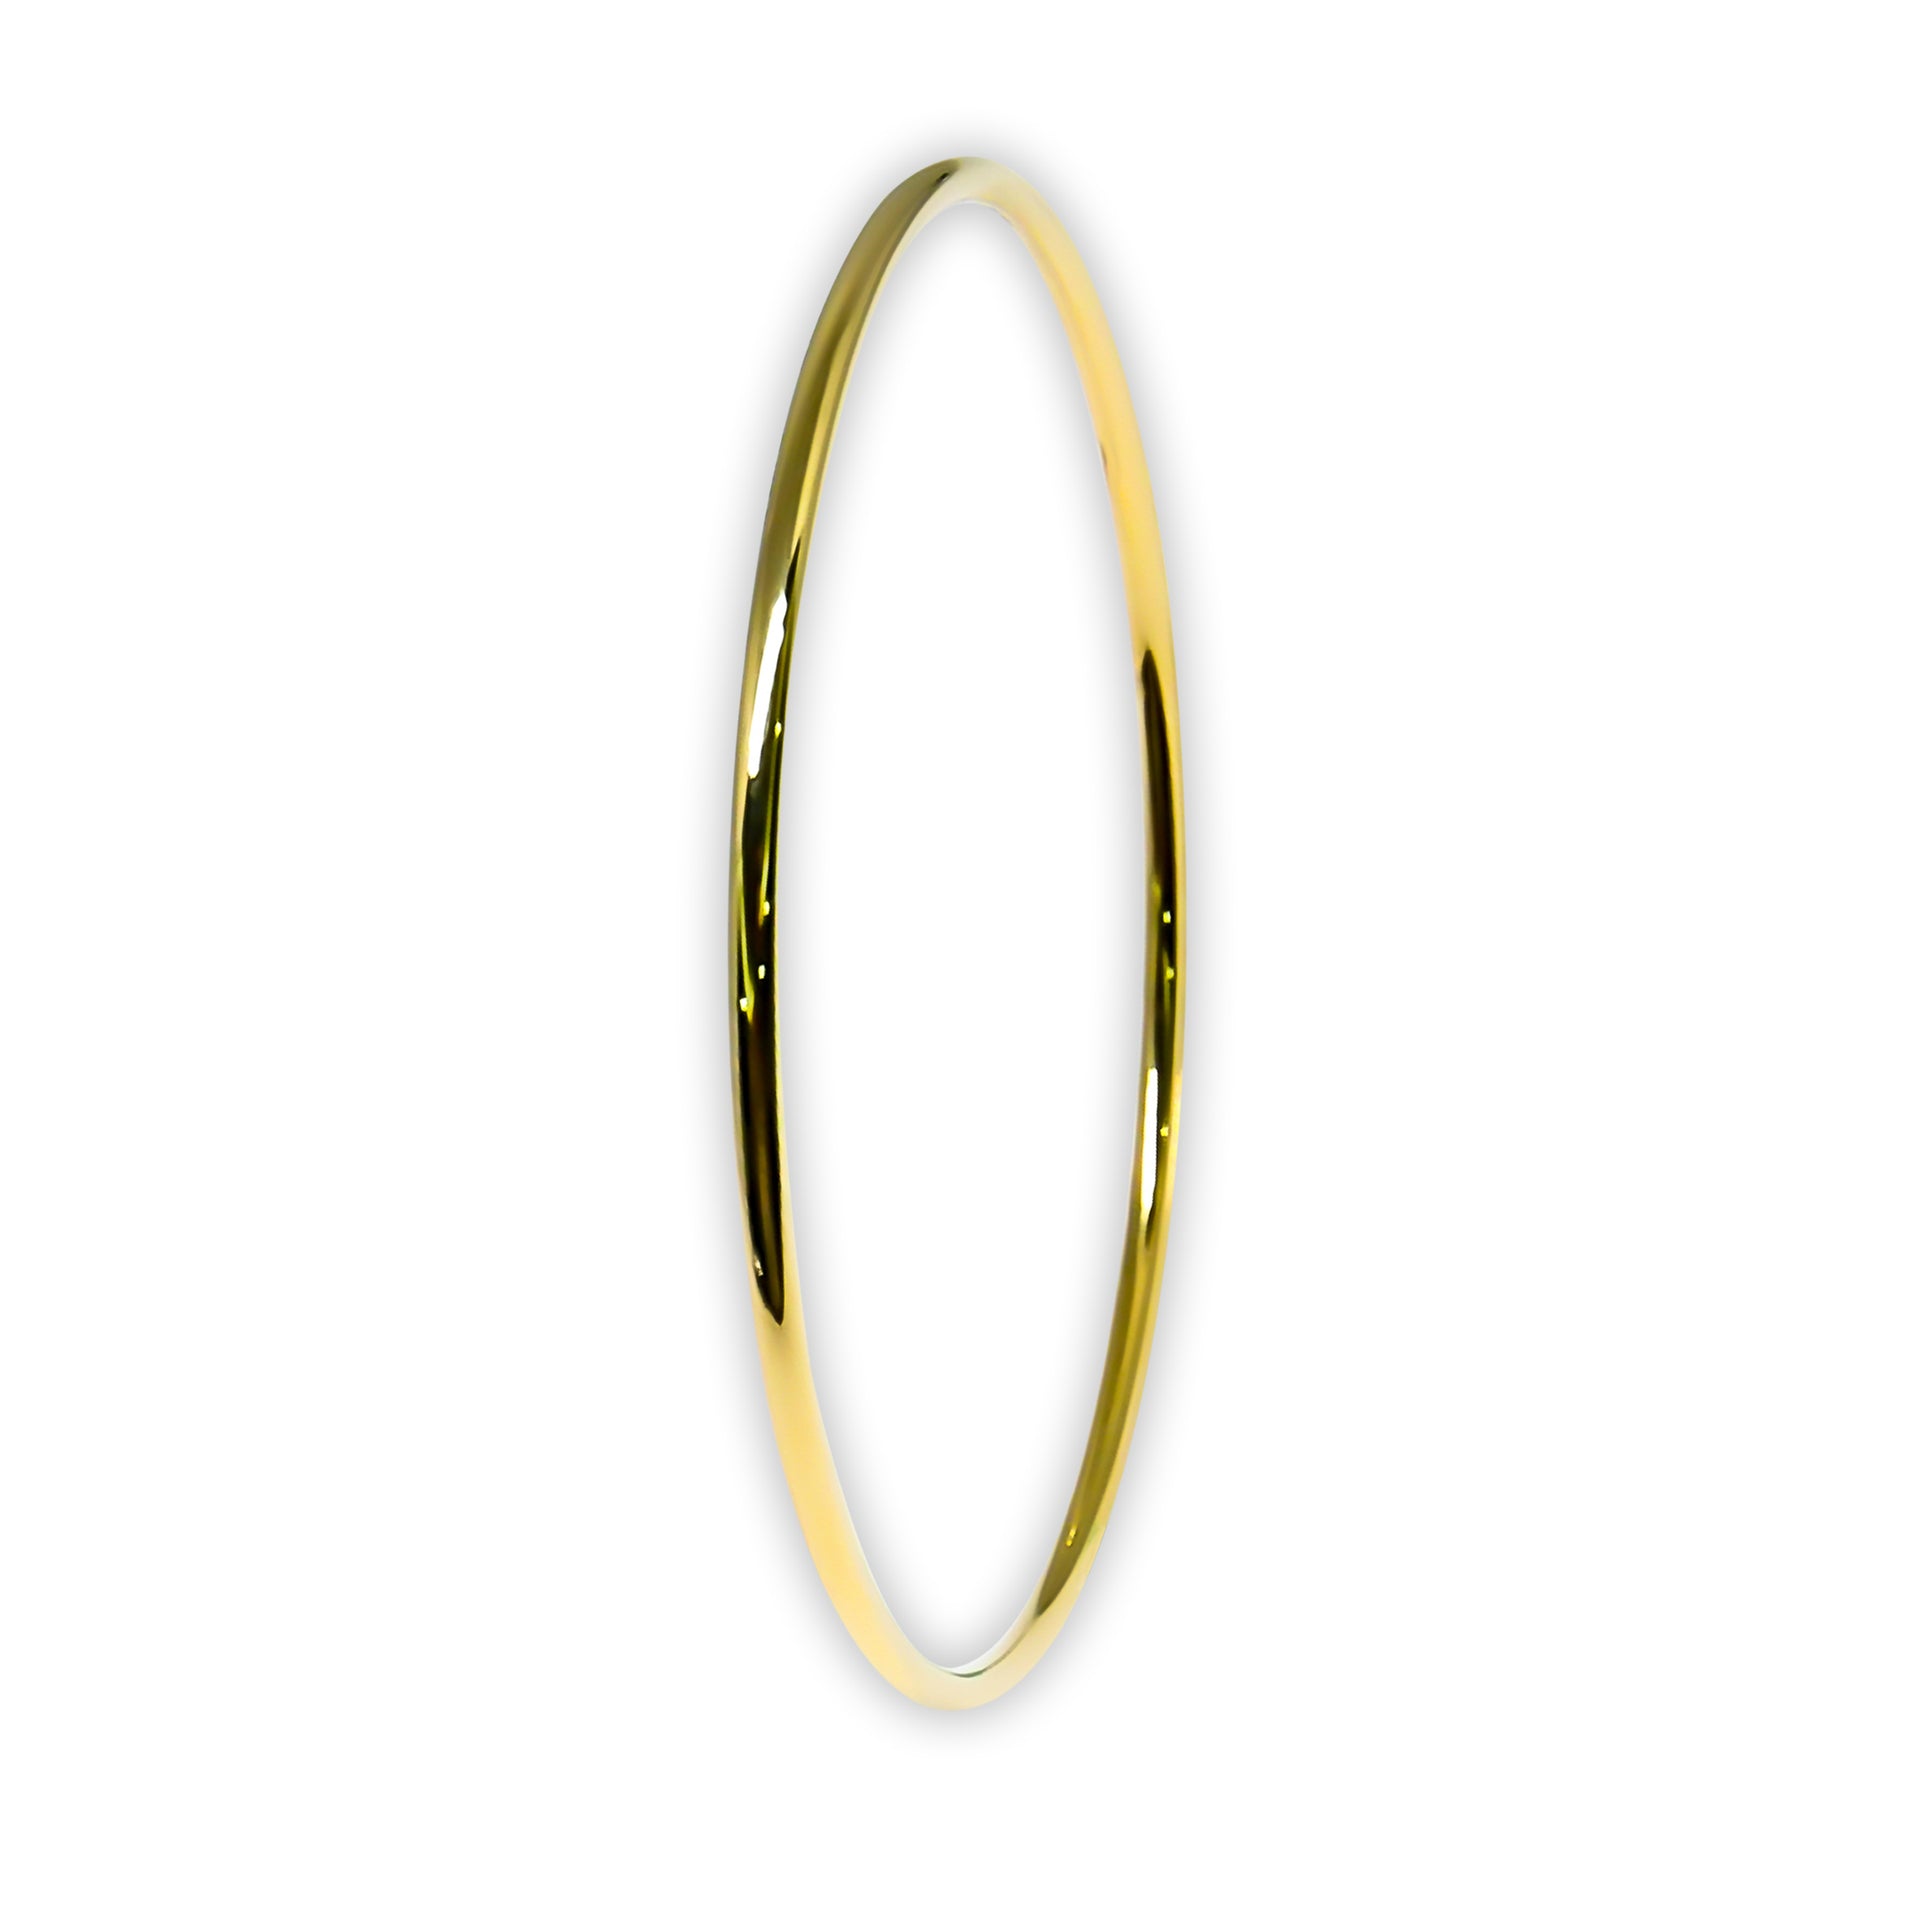 Bangle EARTH IS ROUND 2mm round yellow gold 18k 750